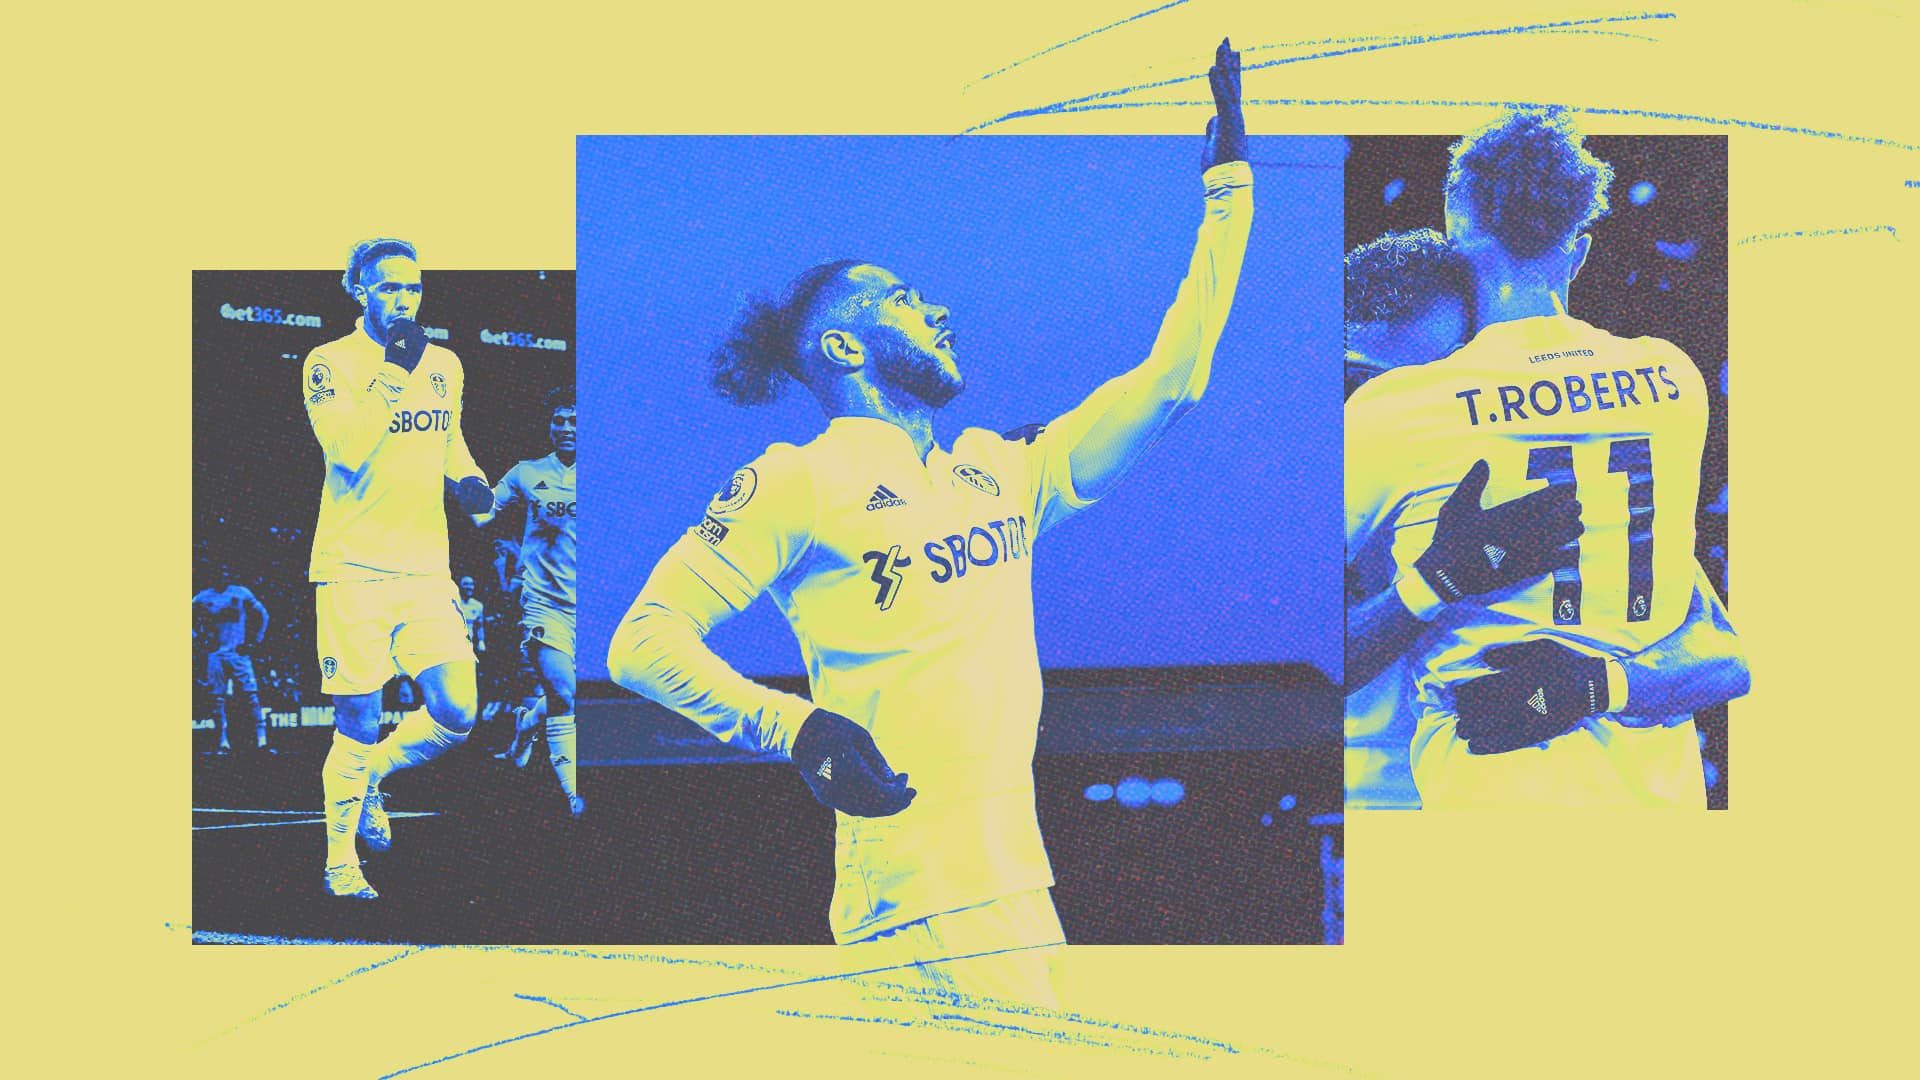 A Tyro triptych, as he celebrates scoring in front of the Kop